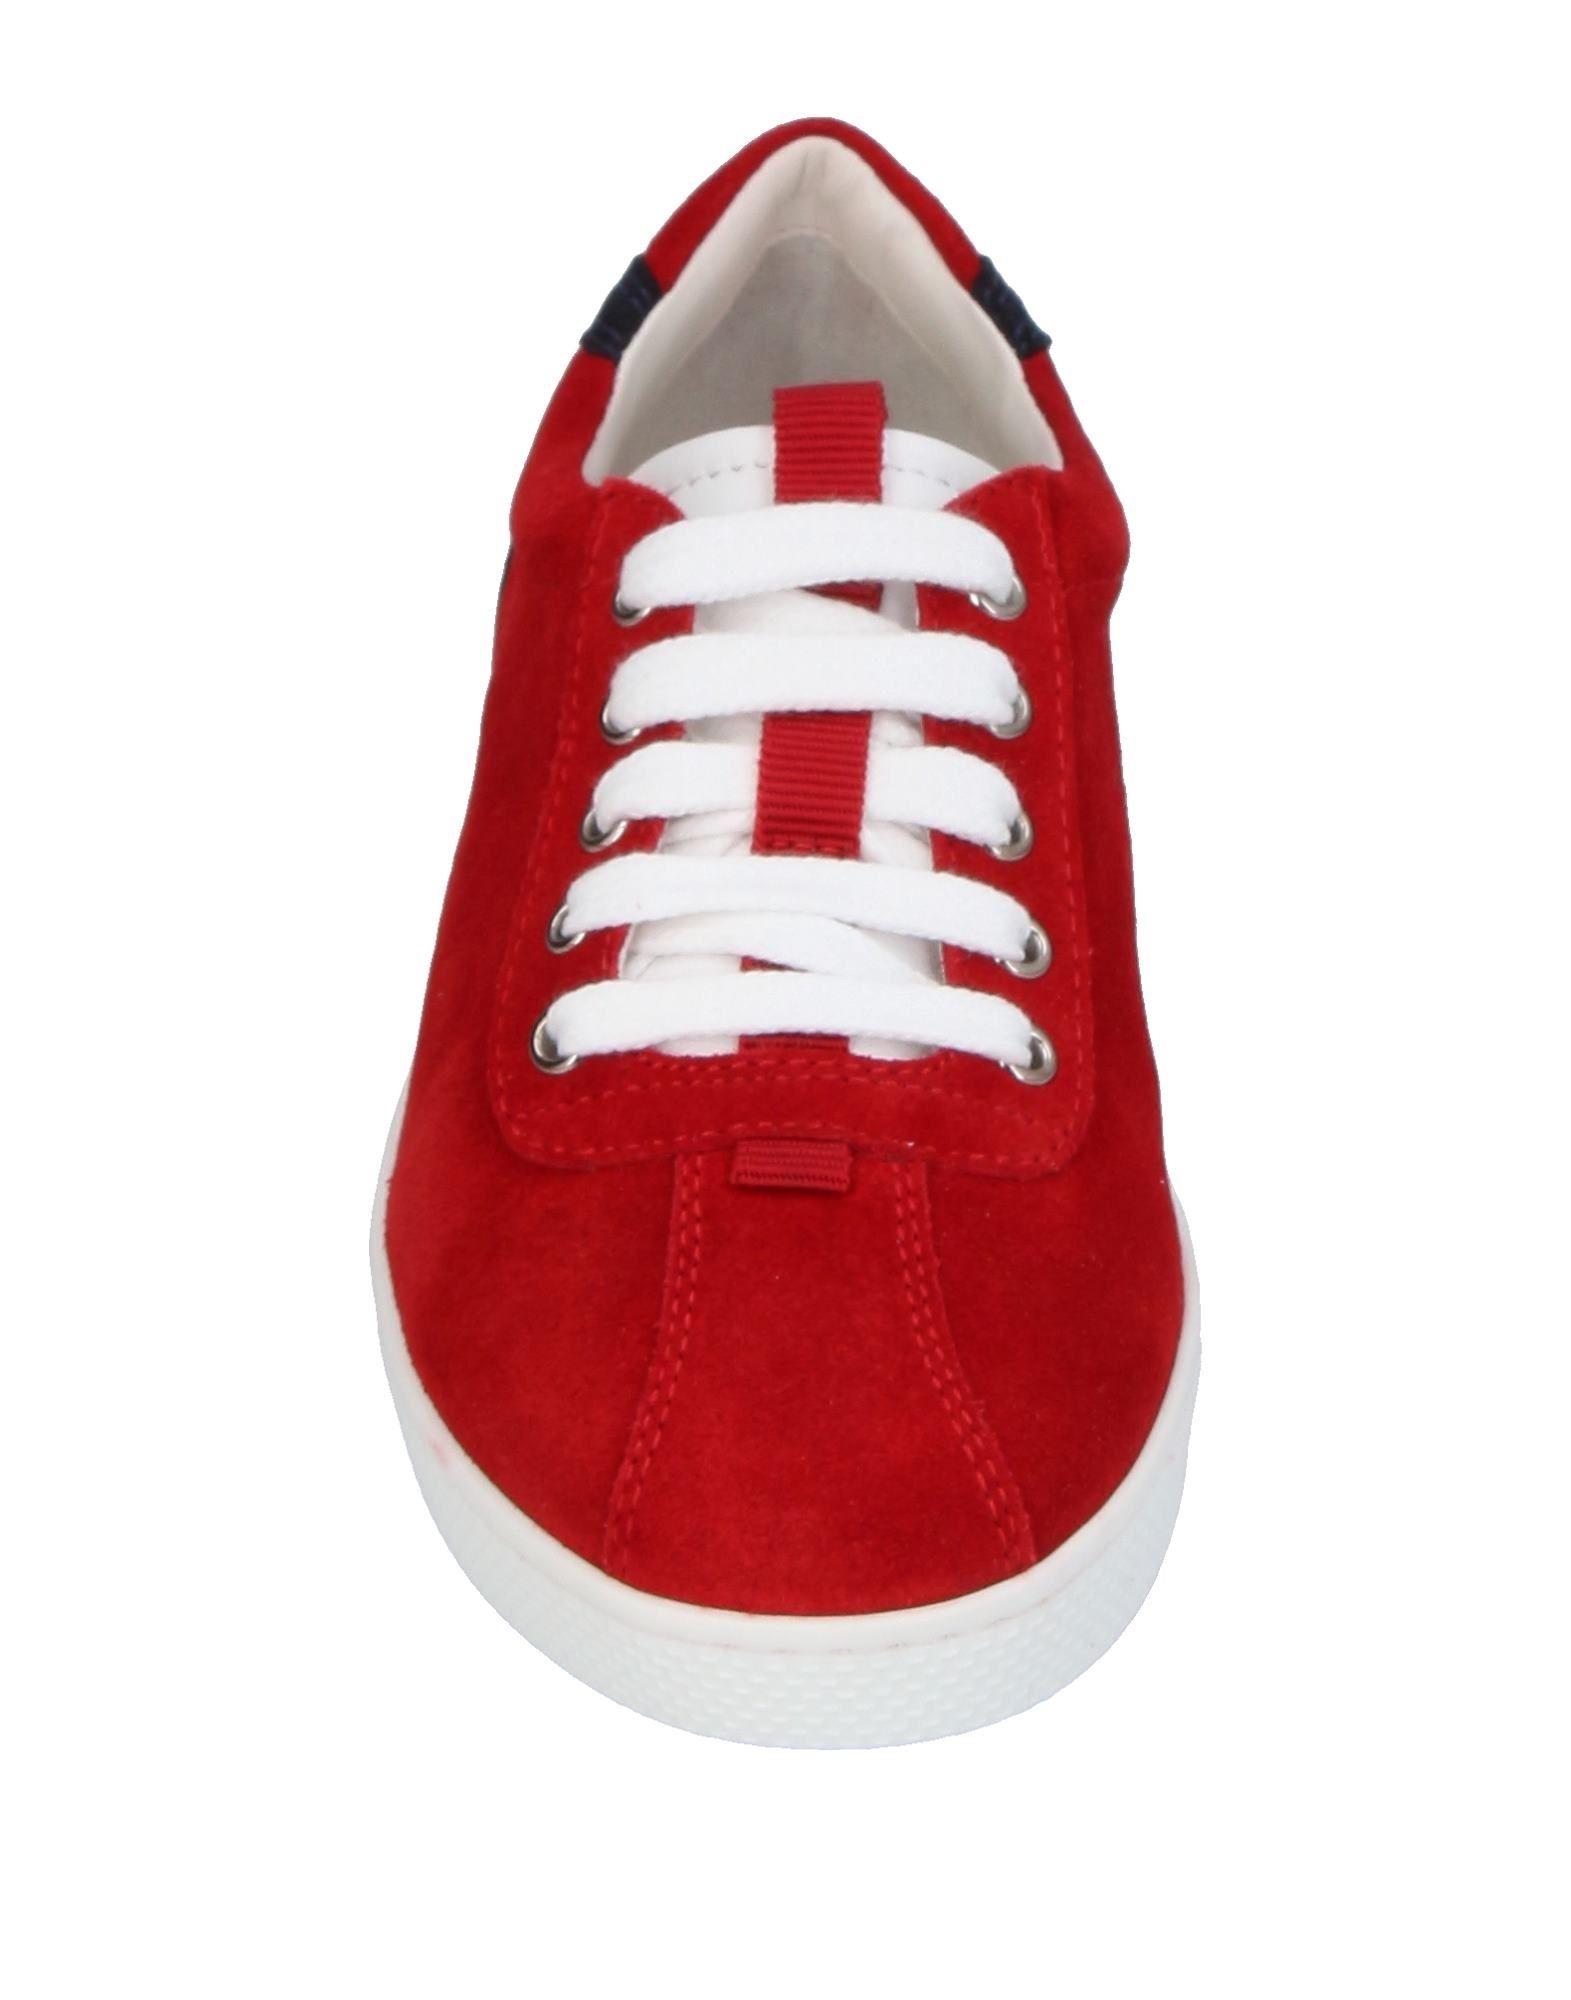 Gucci Suede Low-tops & Sneakers in Red - Lyst